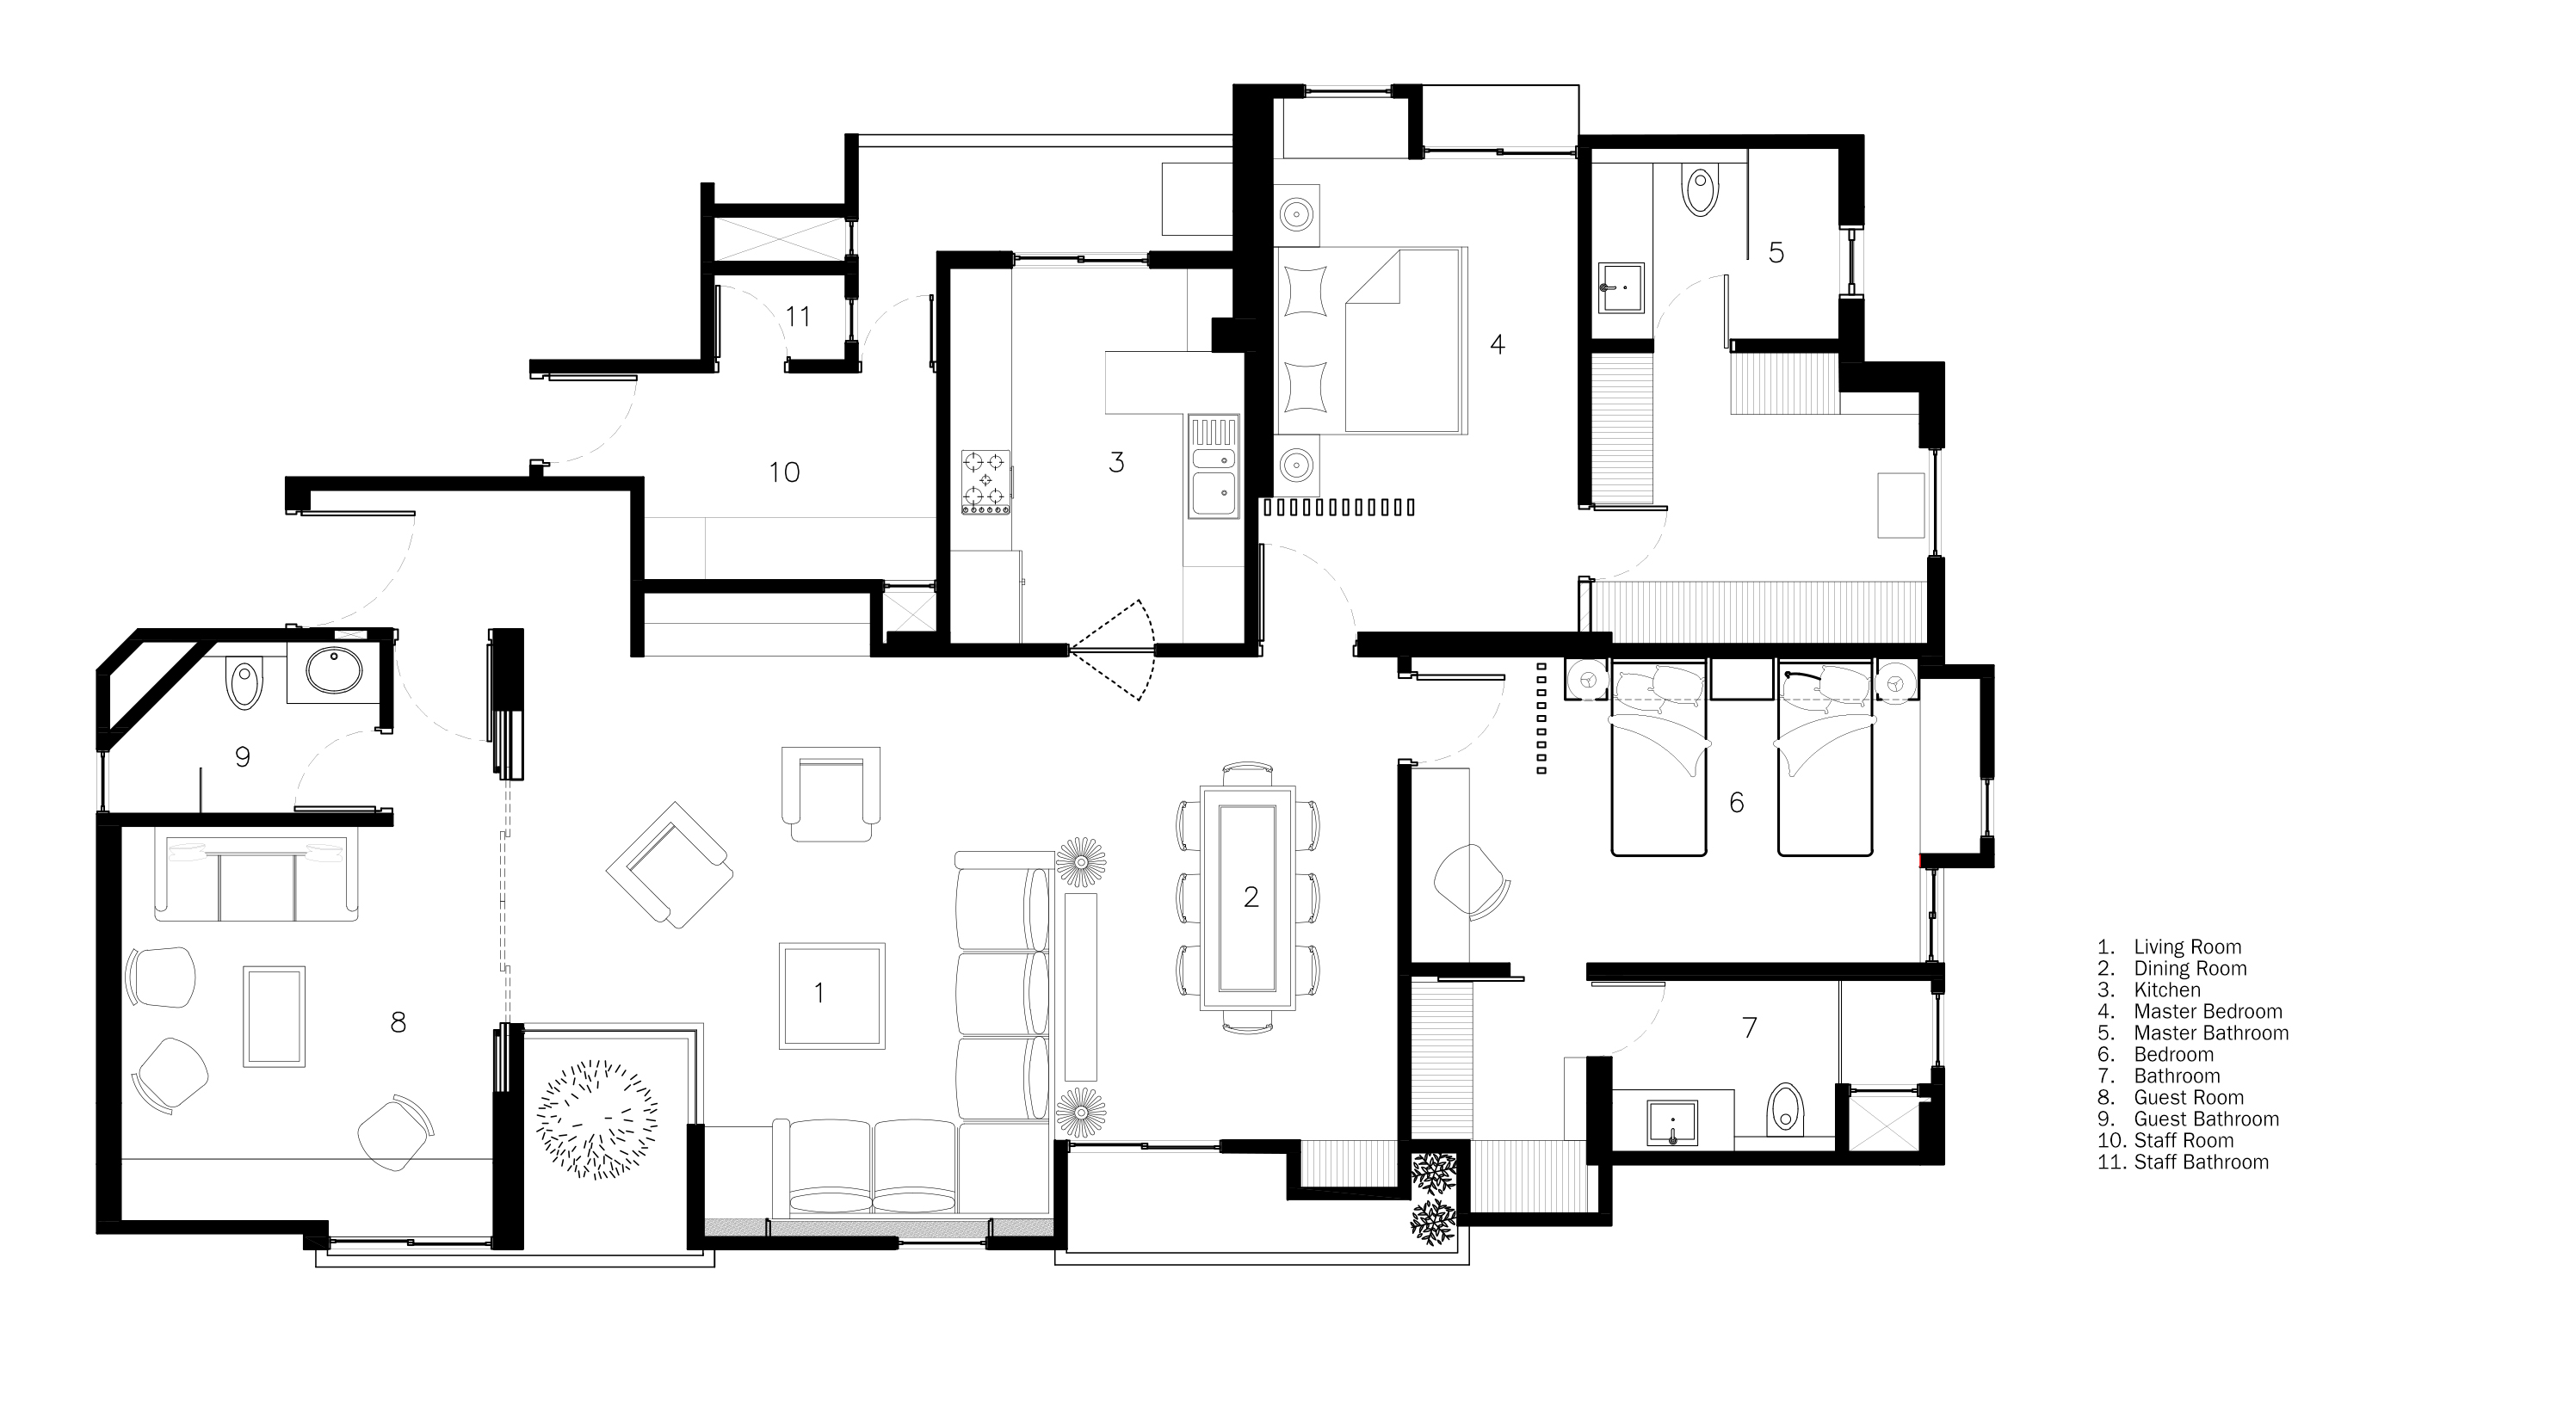 35-1654776471-The house of colour - layout.jpg